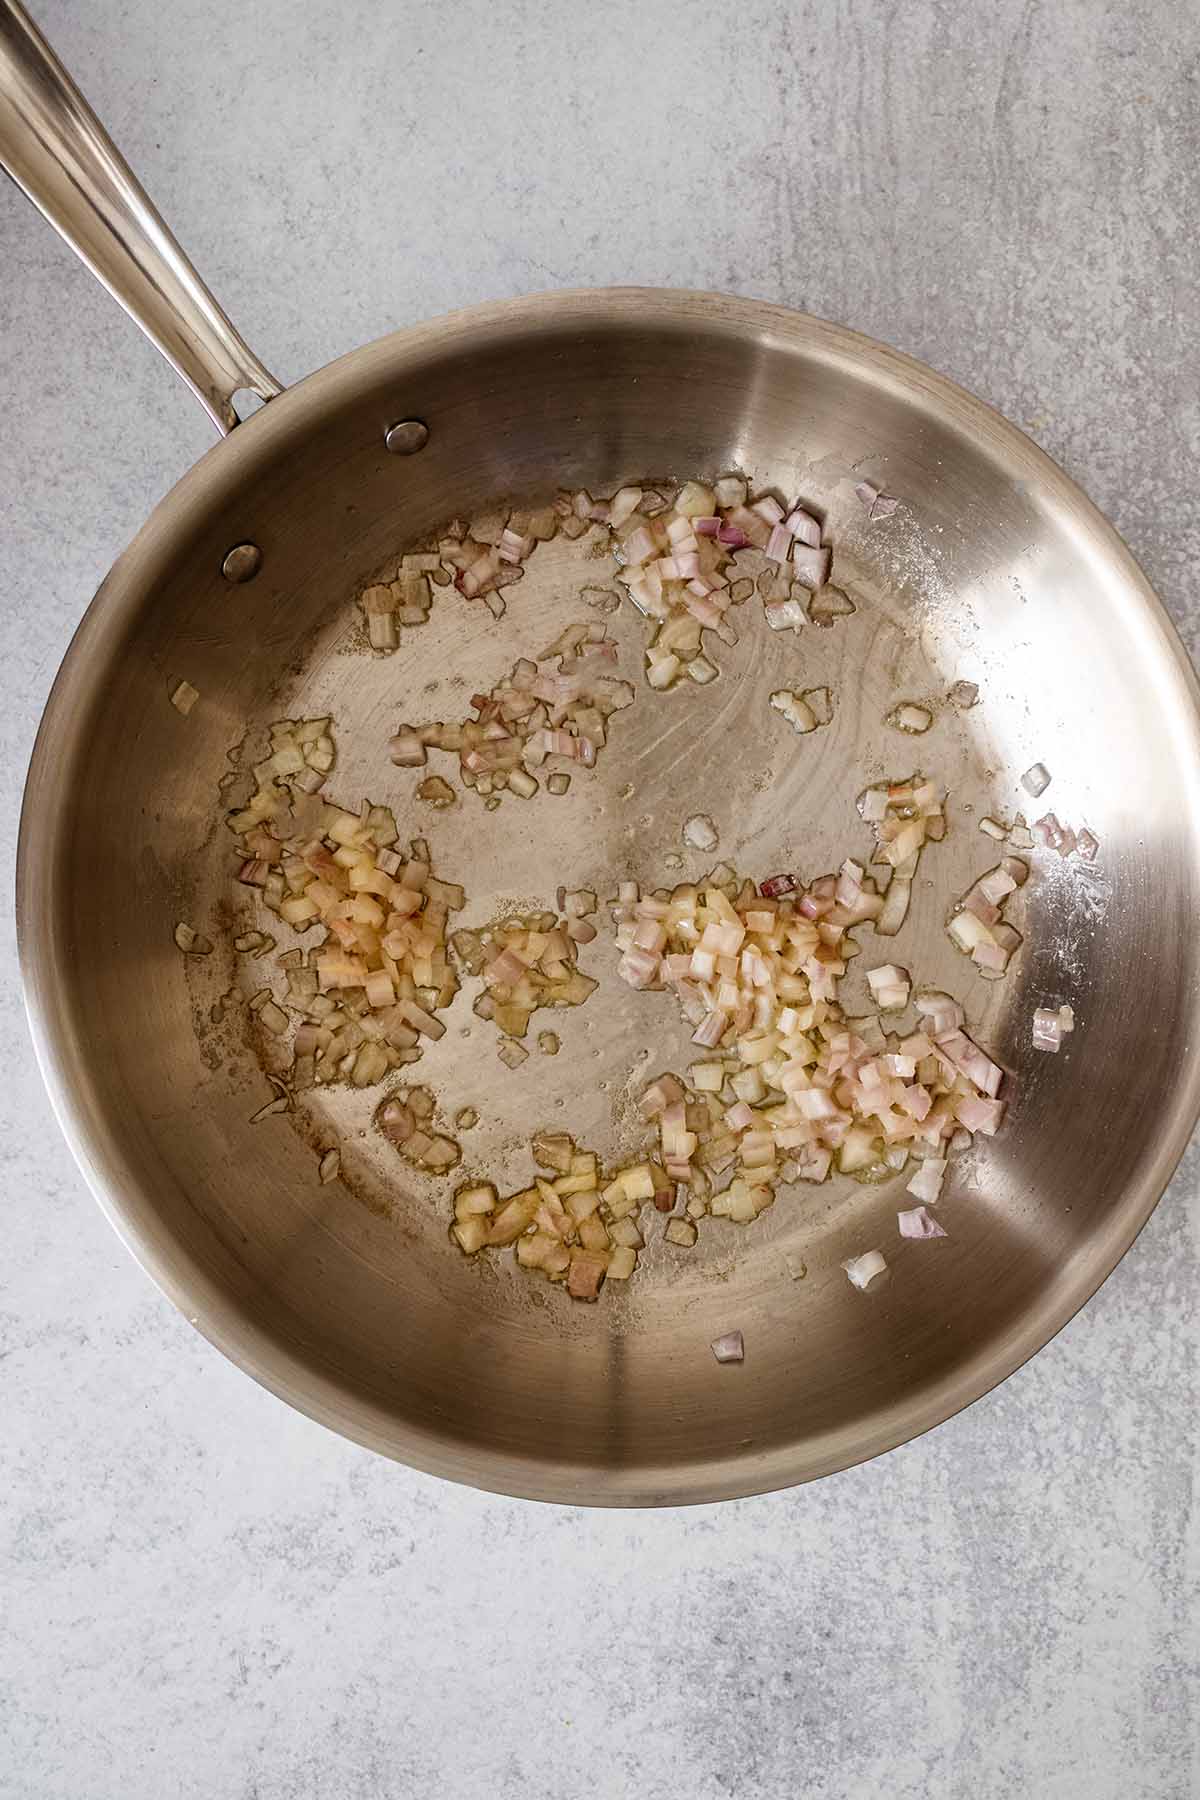 Chopped shallot cooking in a stainless steel skillet,